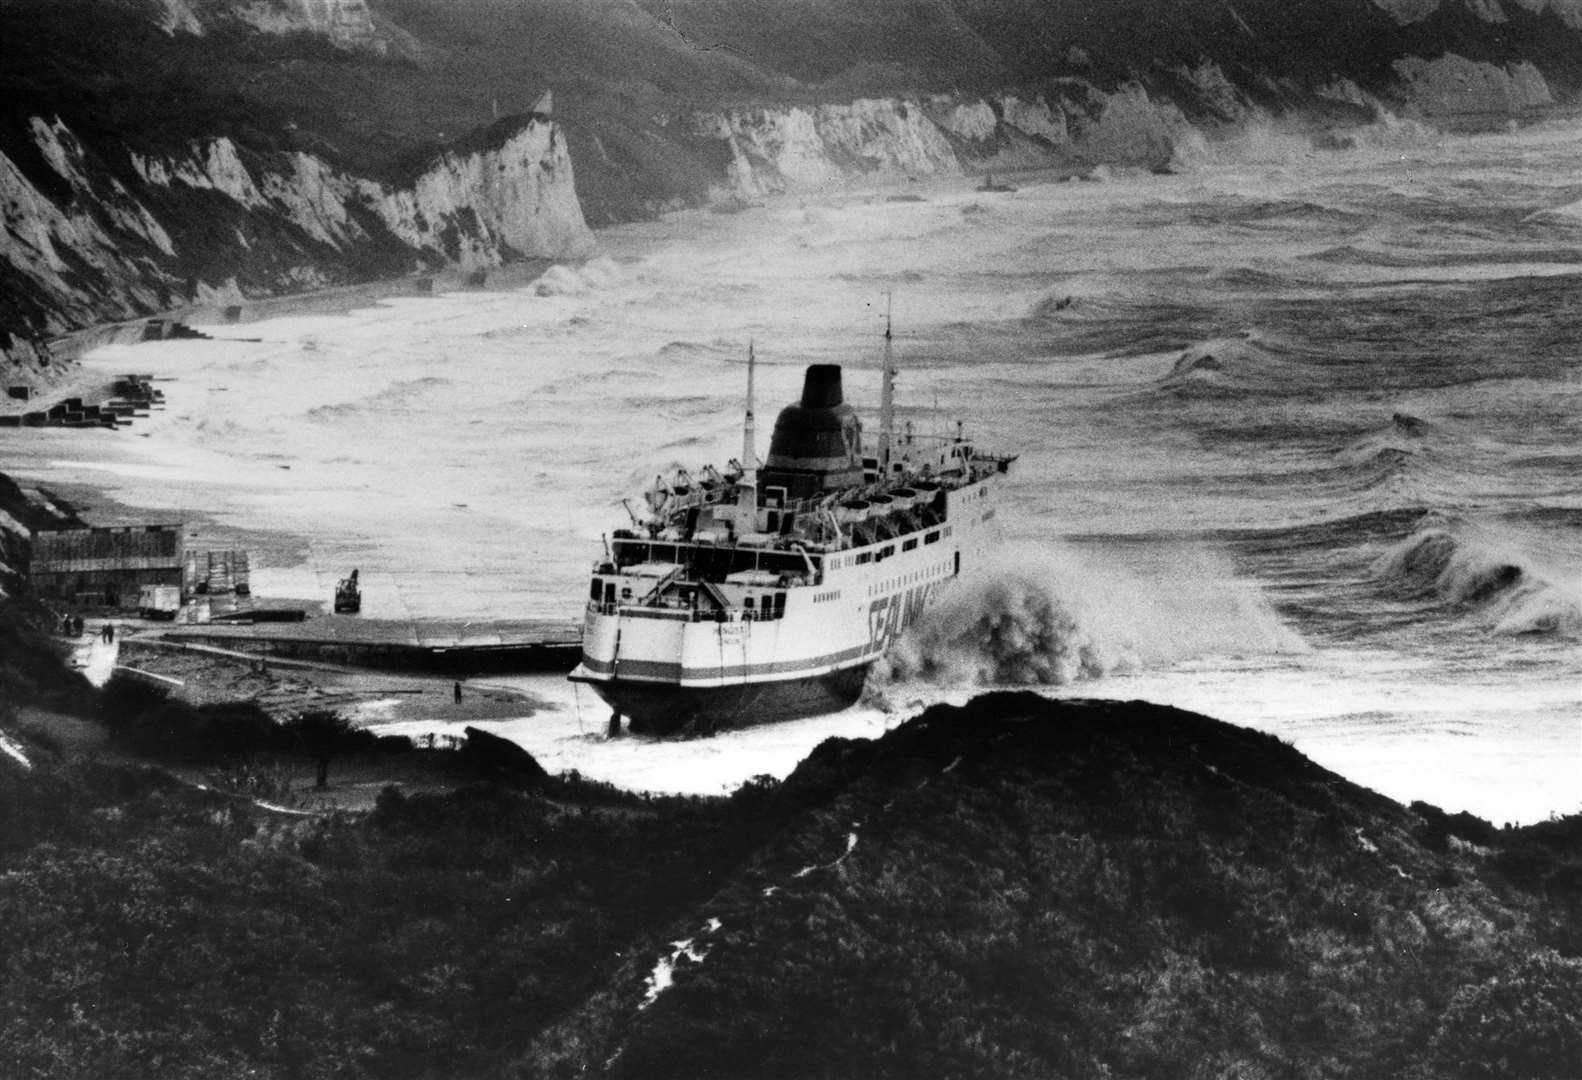 Sealink ferry the Hengist was washed up on a beach near Folkestone as a result of the storm. Picture: Paul Amos